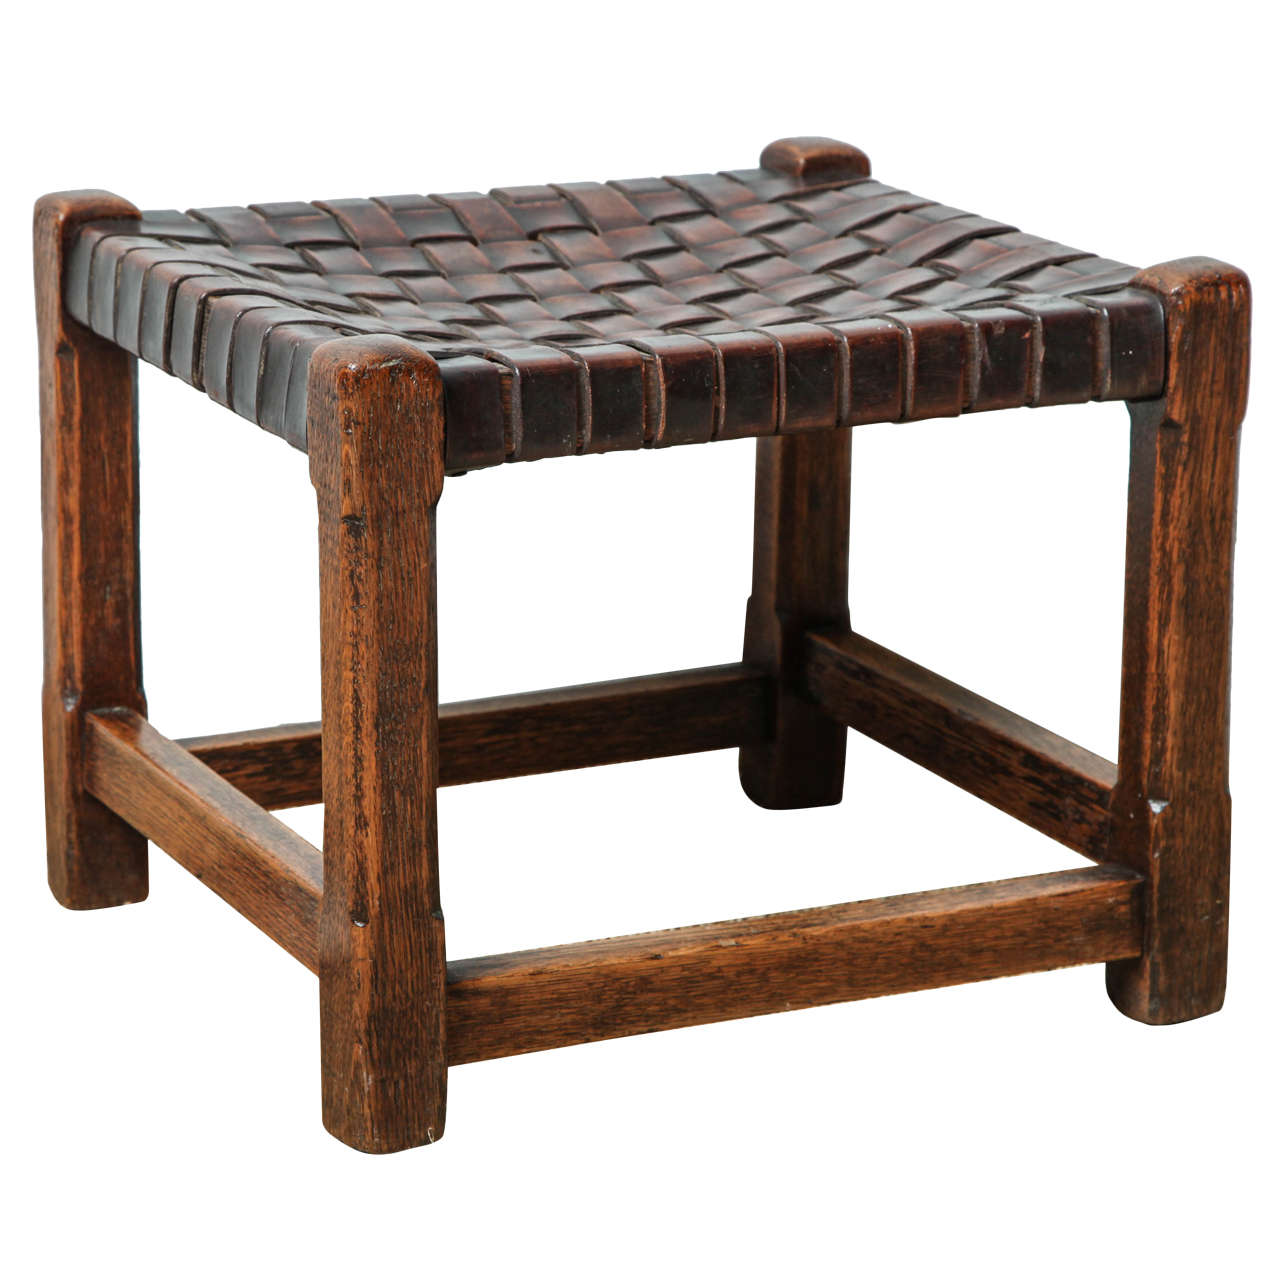 English Arts and Crafts Oak and Leather Stool